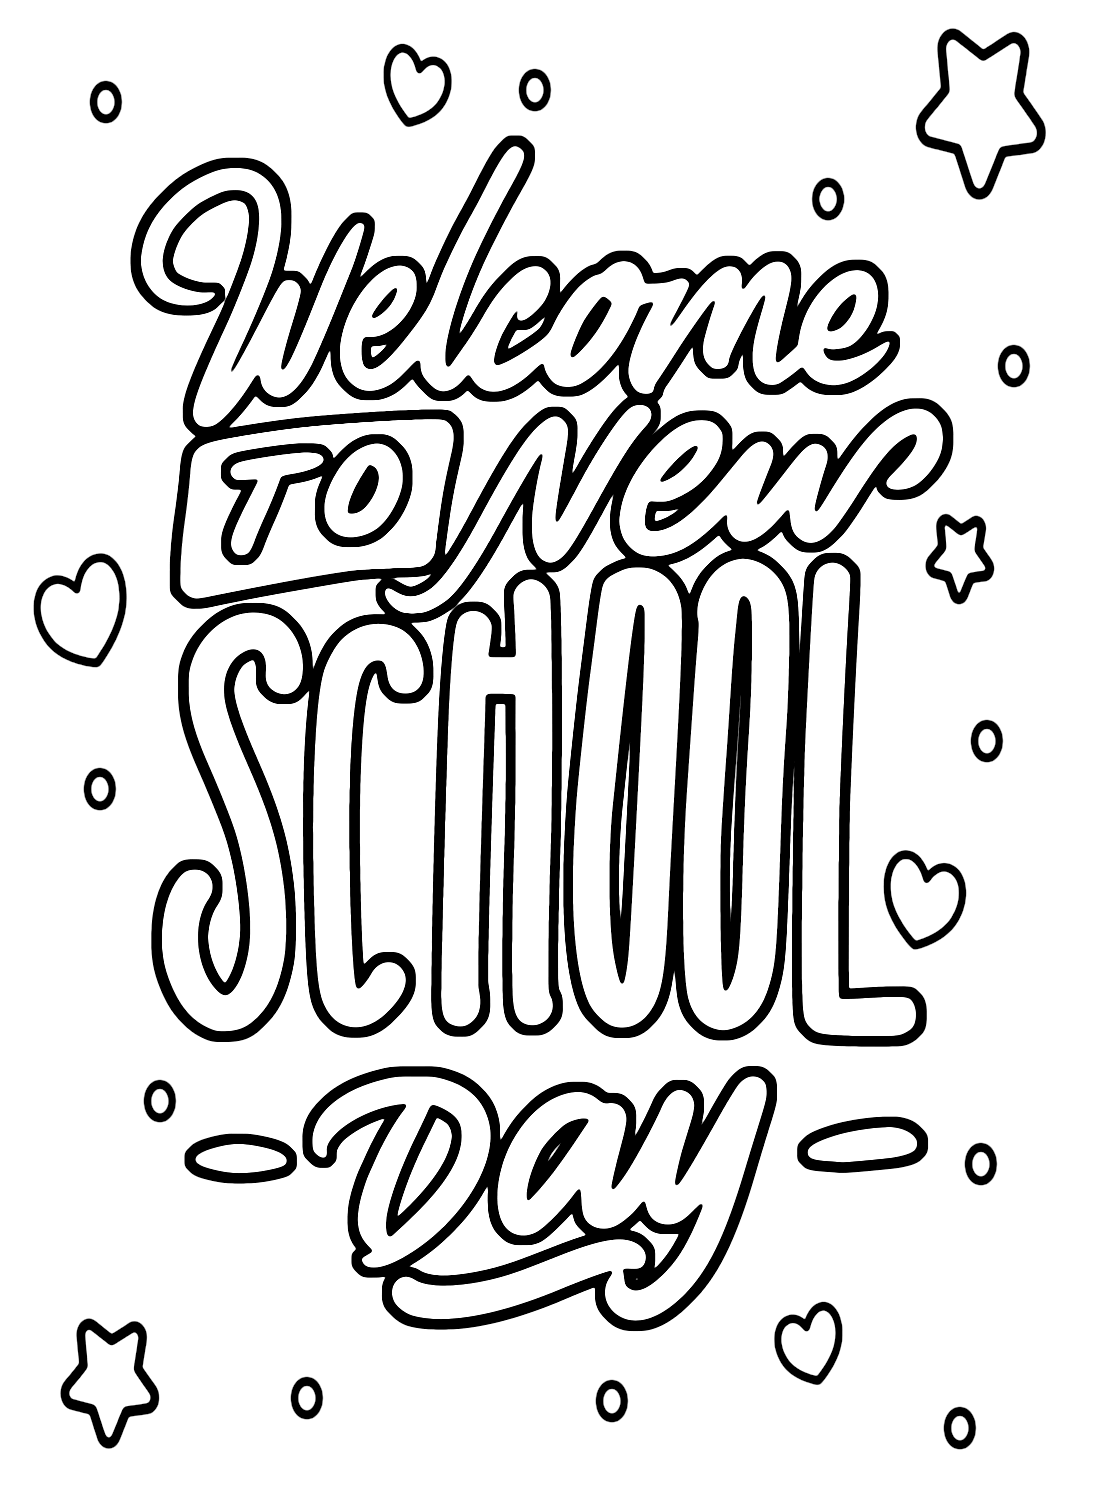 Welcom to New School Day Coloring